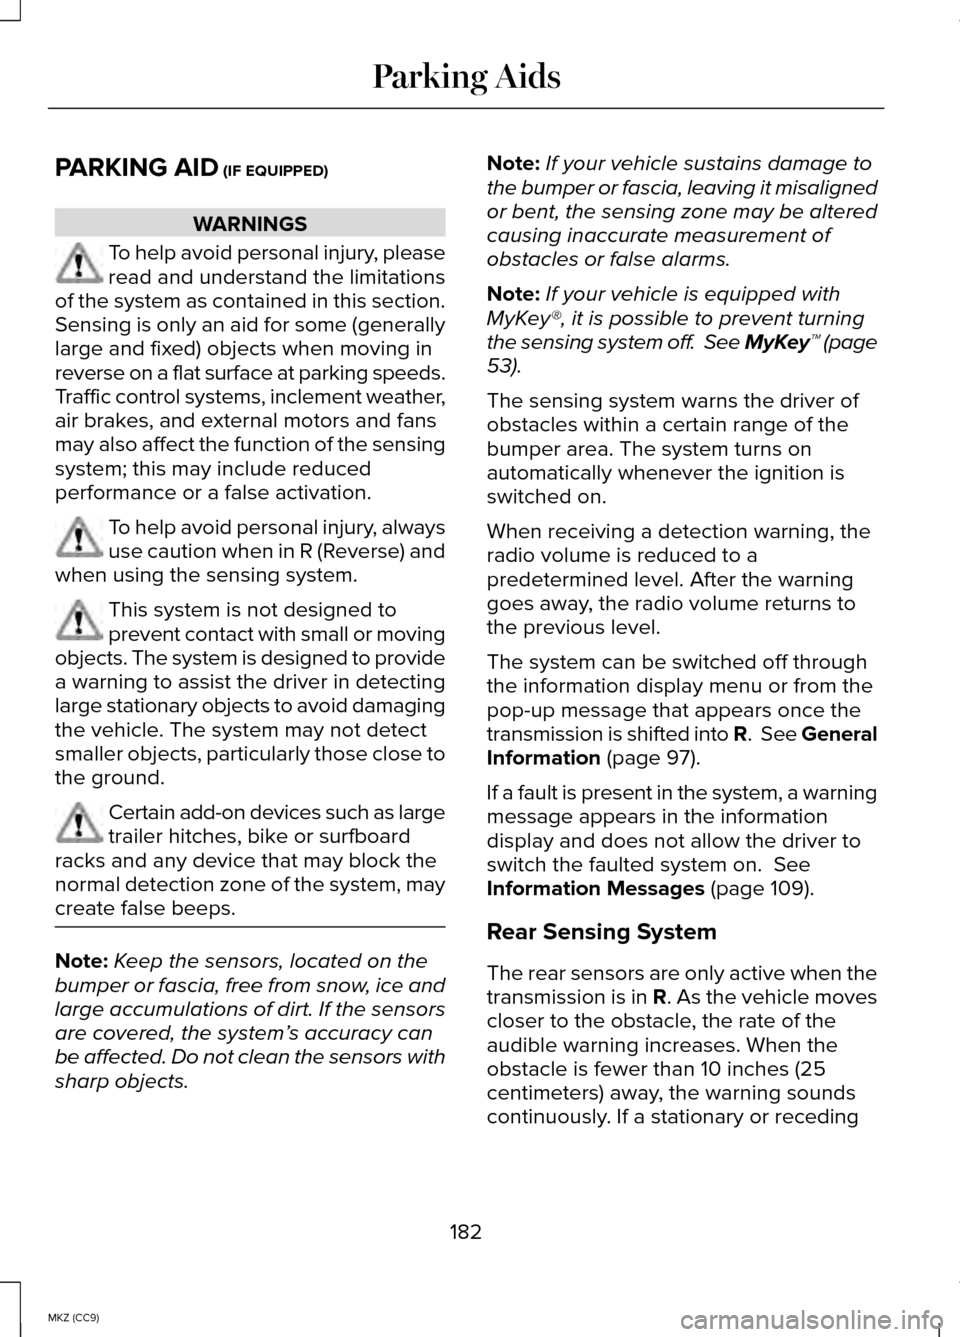 LINCOLN MKZ HYBRID 2014 User Guide PARKING AID (IF EQUIPPED)
WARNINGS
To help avoid personal injury, please
read and understand the limitations
of the system as contained in this section.
Sensing is only an aid for some (generally
larg